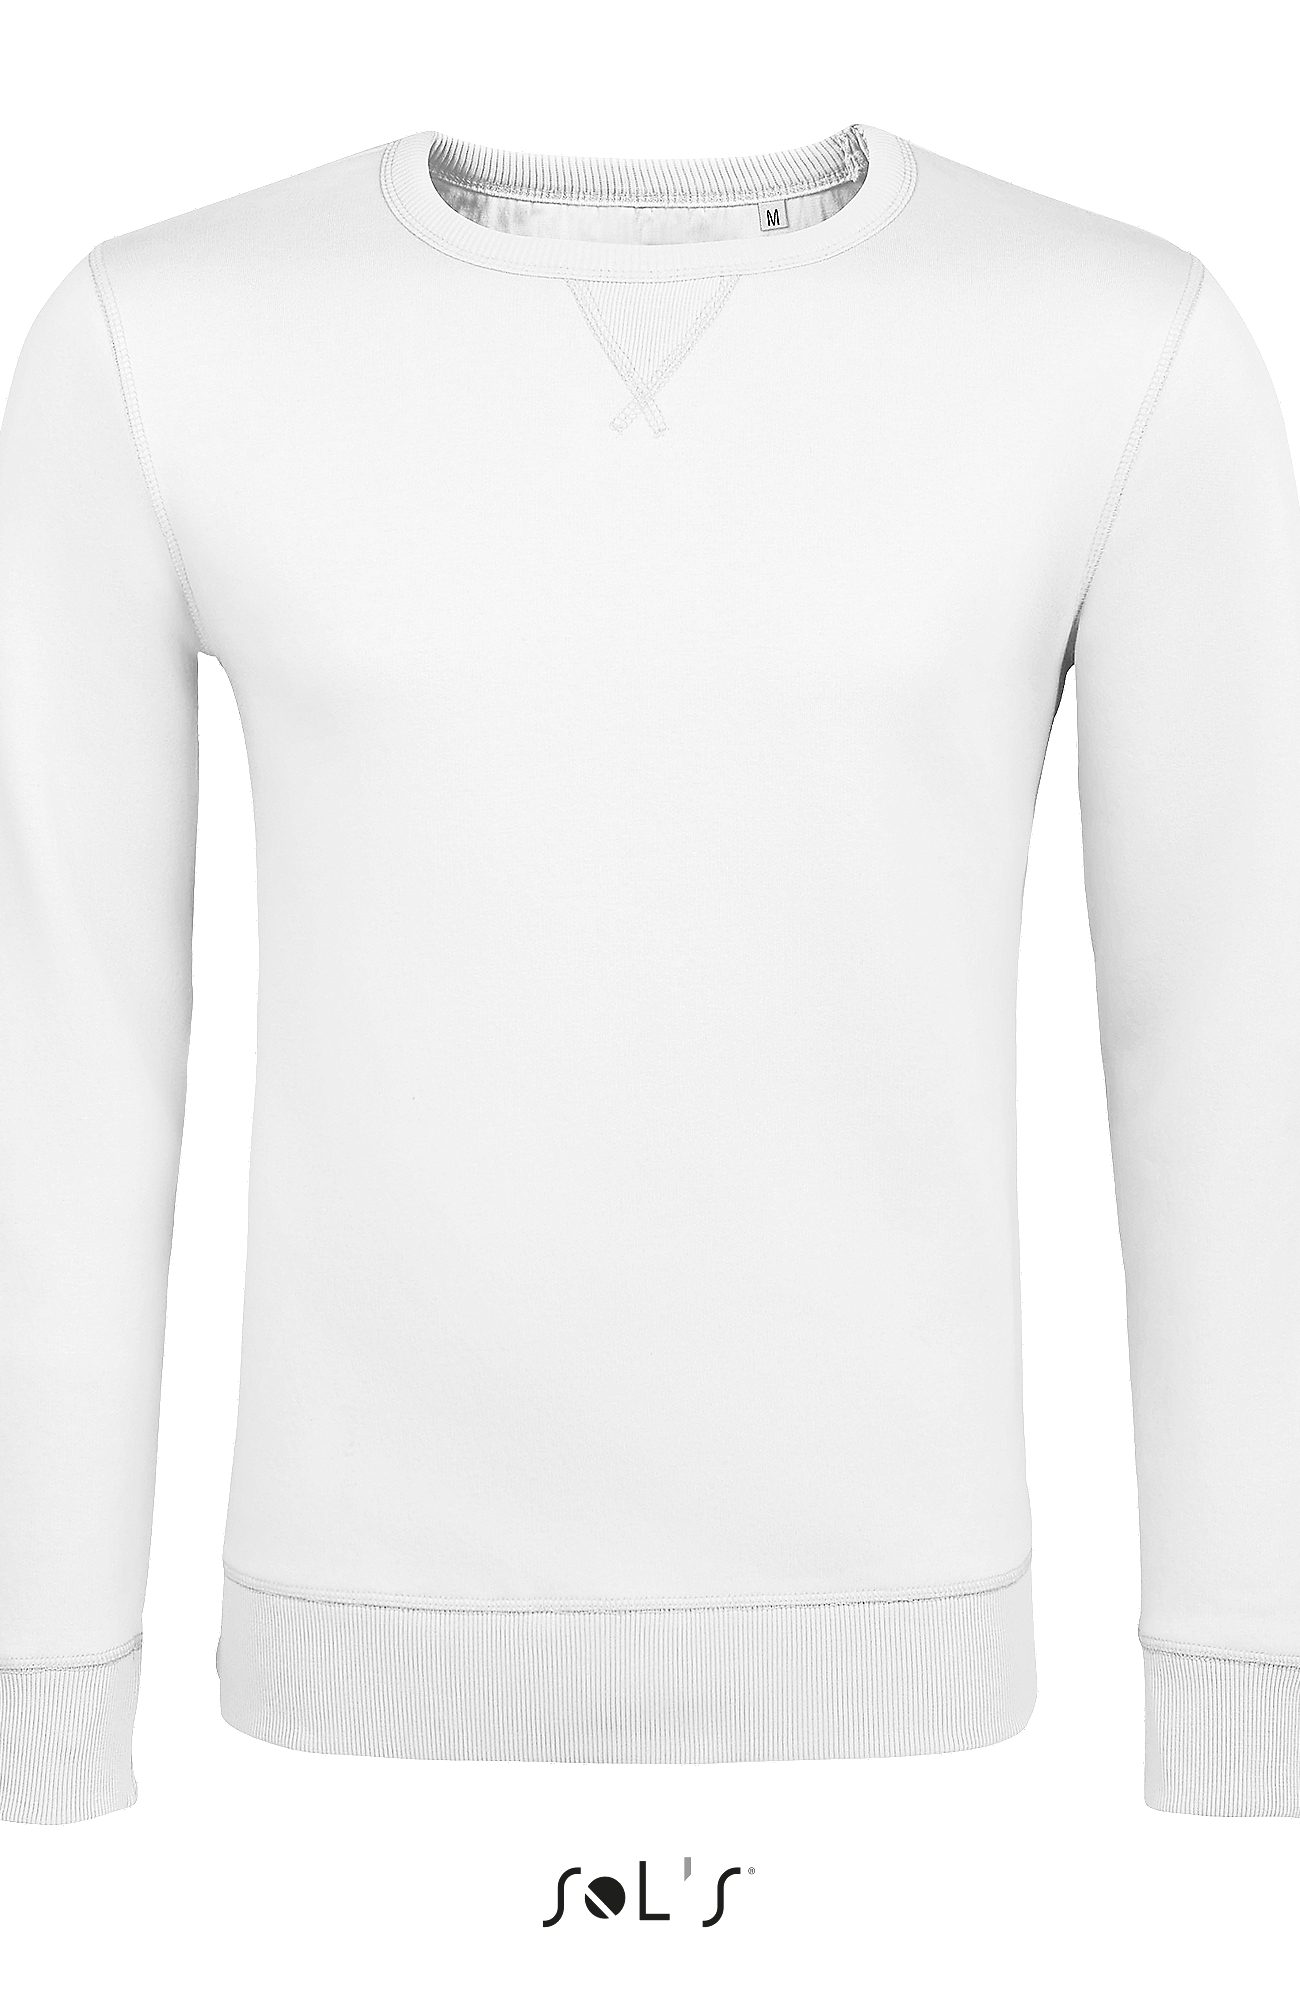 Sweat-Shirt Homme Col Rond Sully à personnaliser - SOL'S